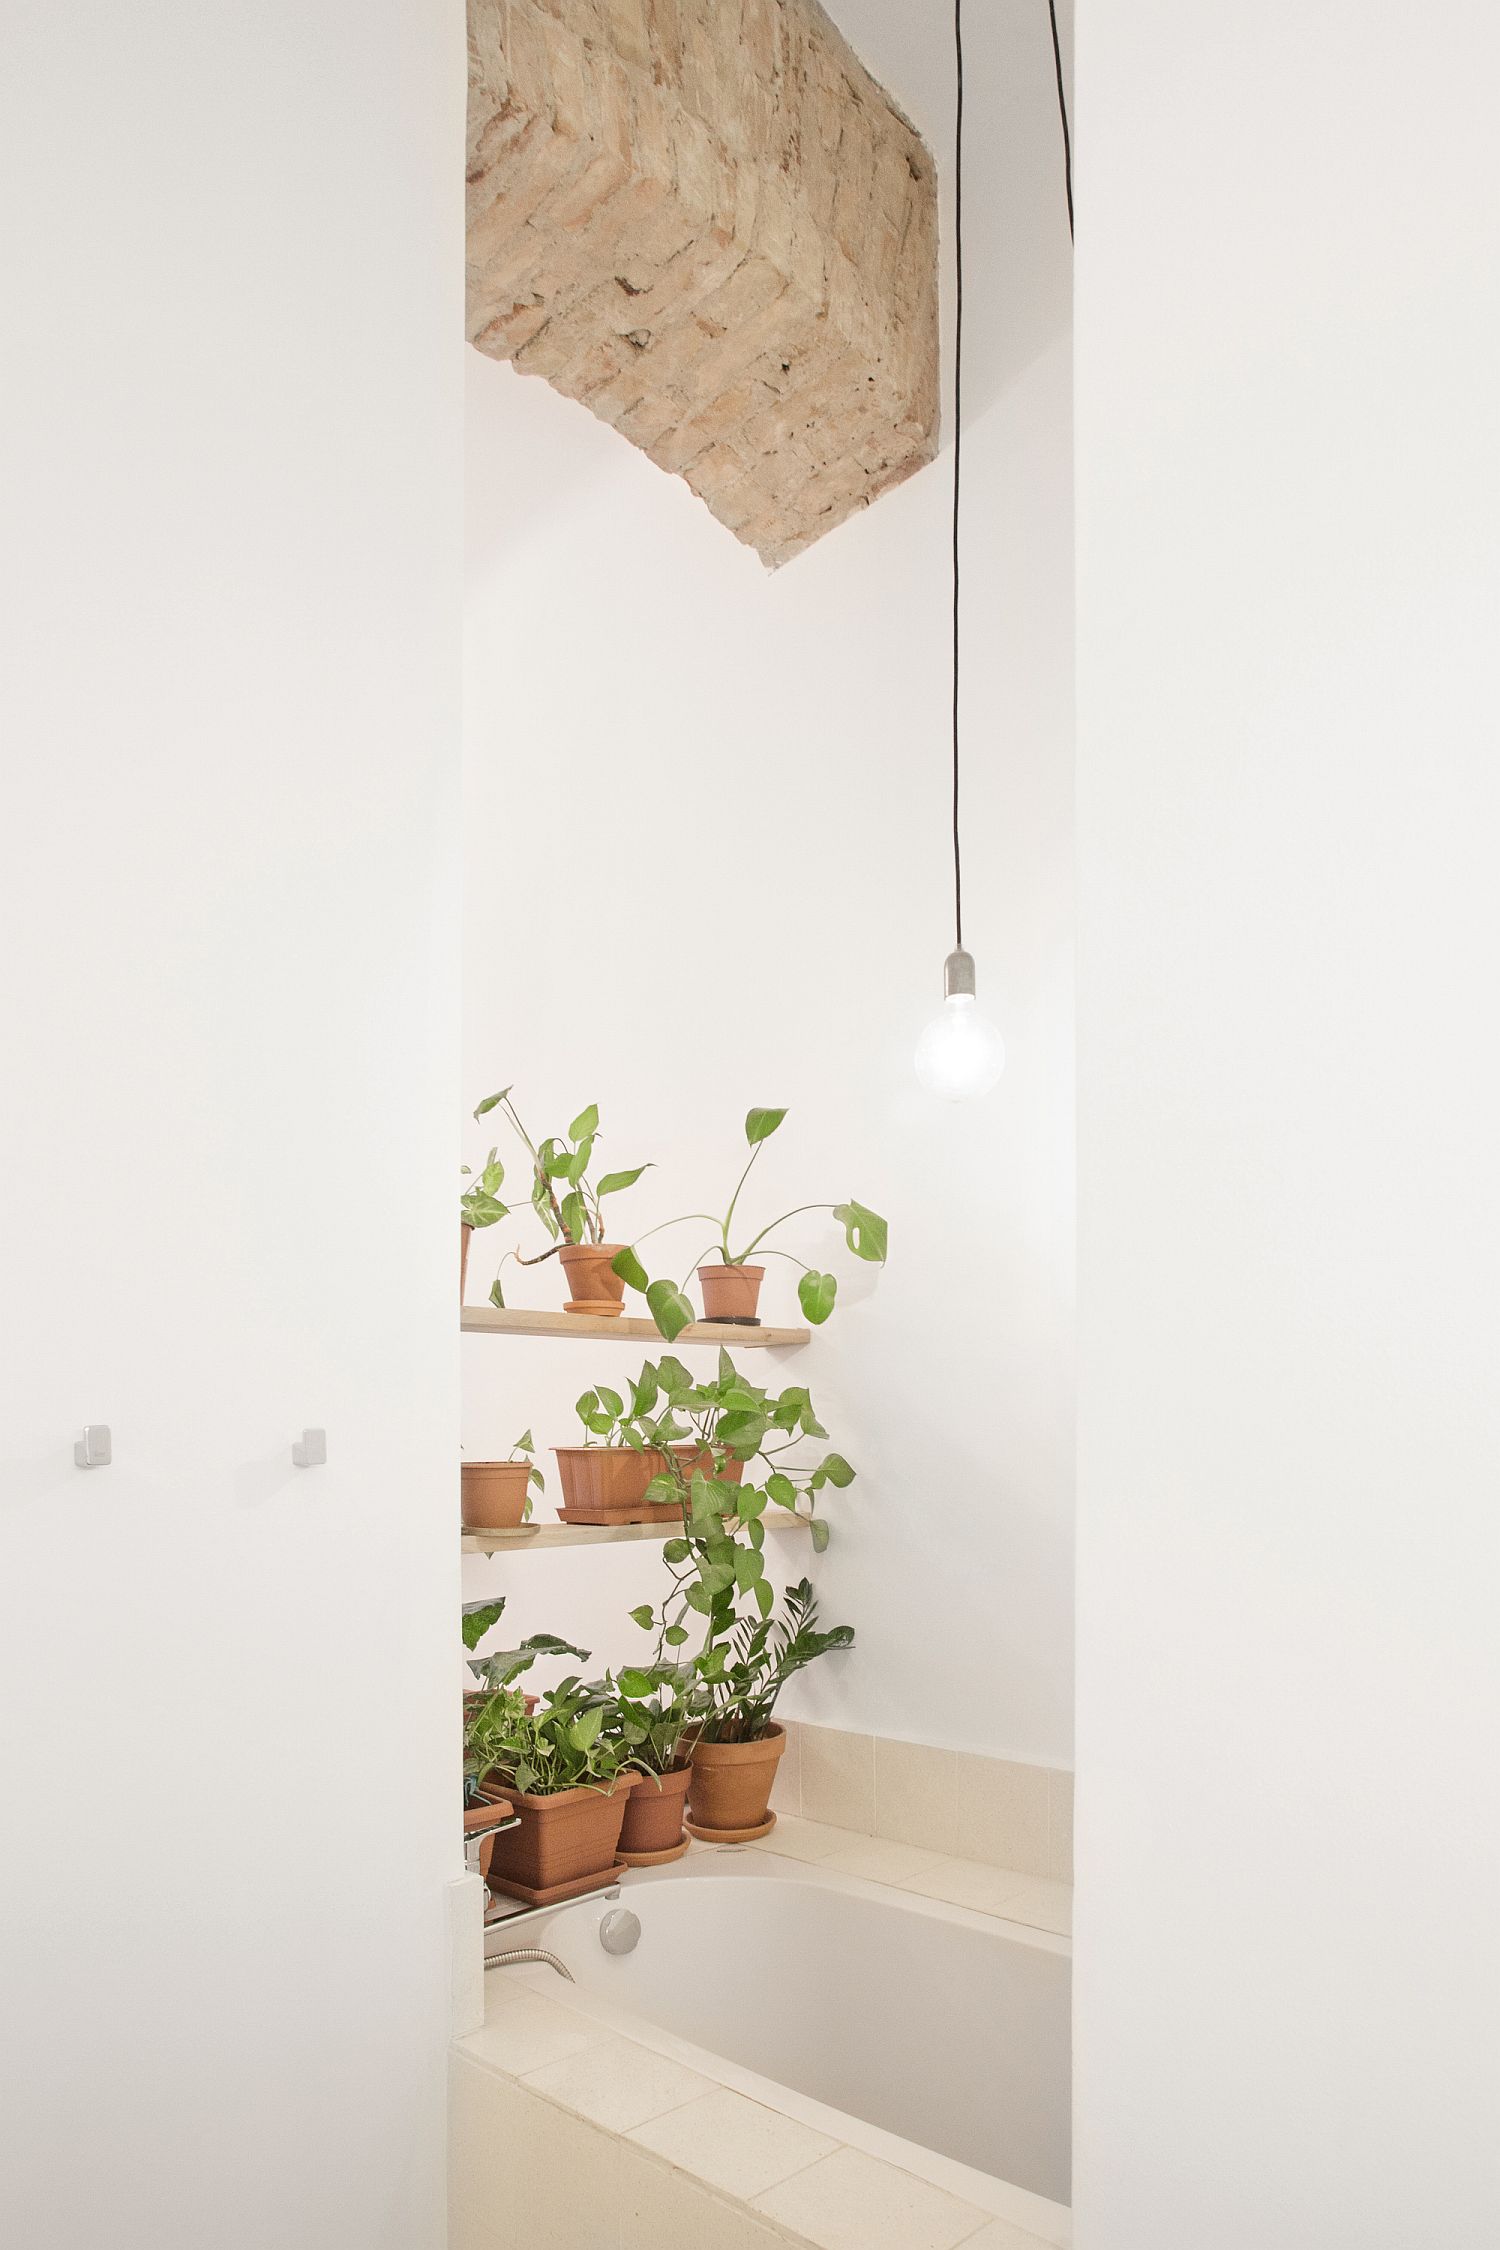 Green wall with a way to the dressing area and bathroom below